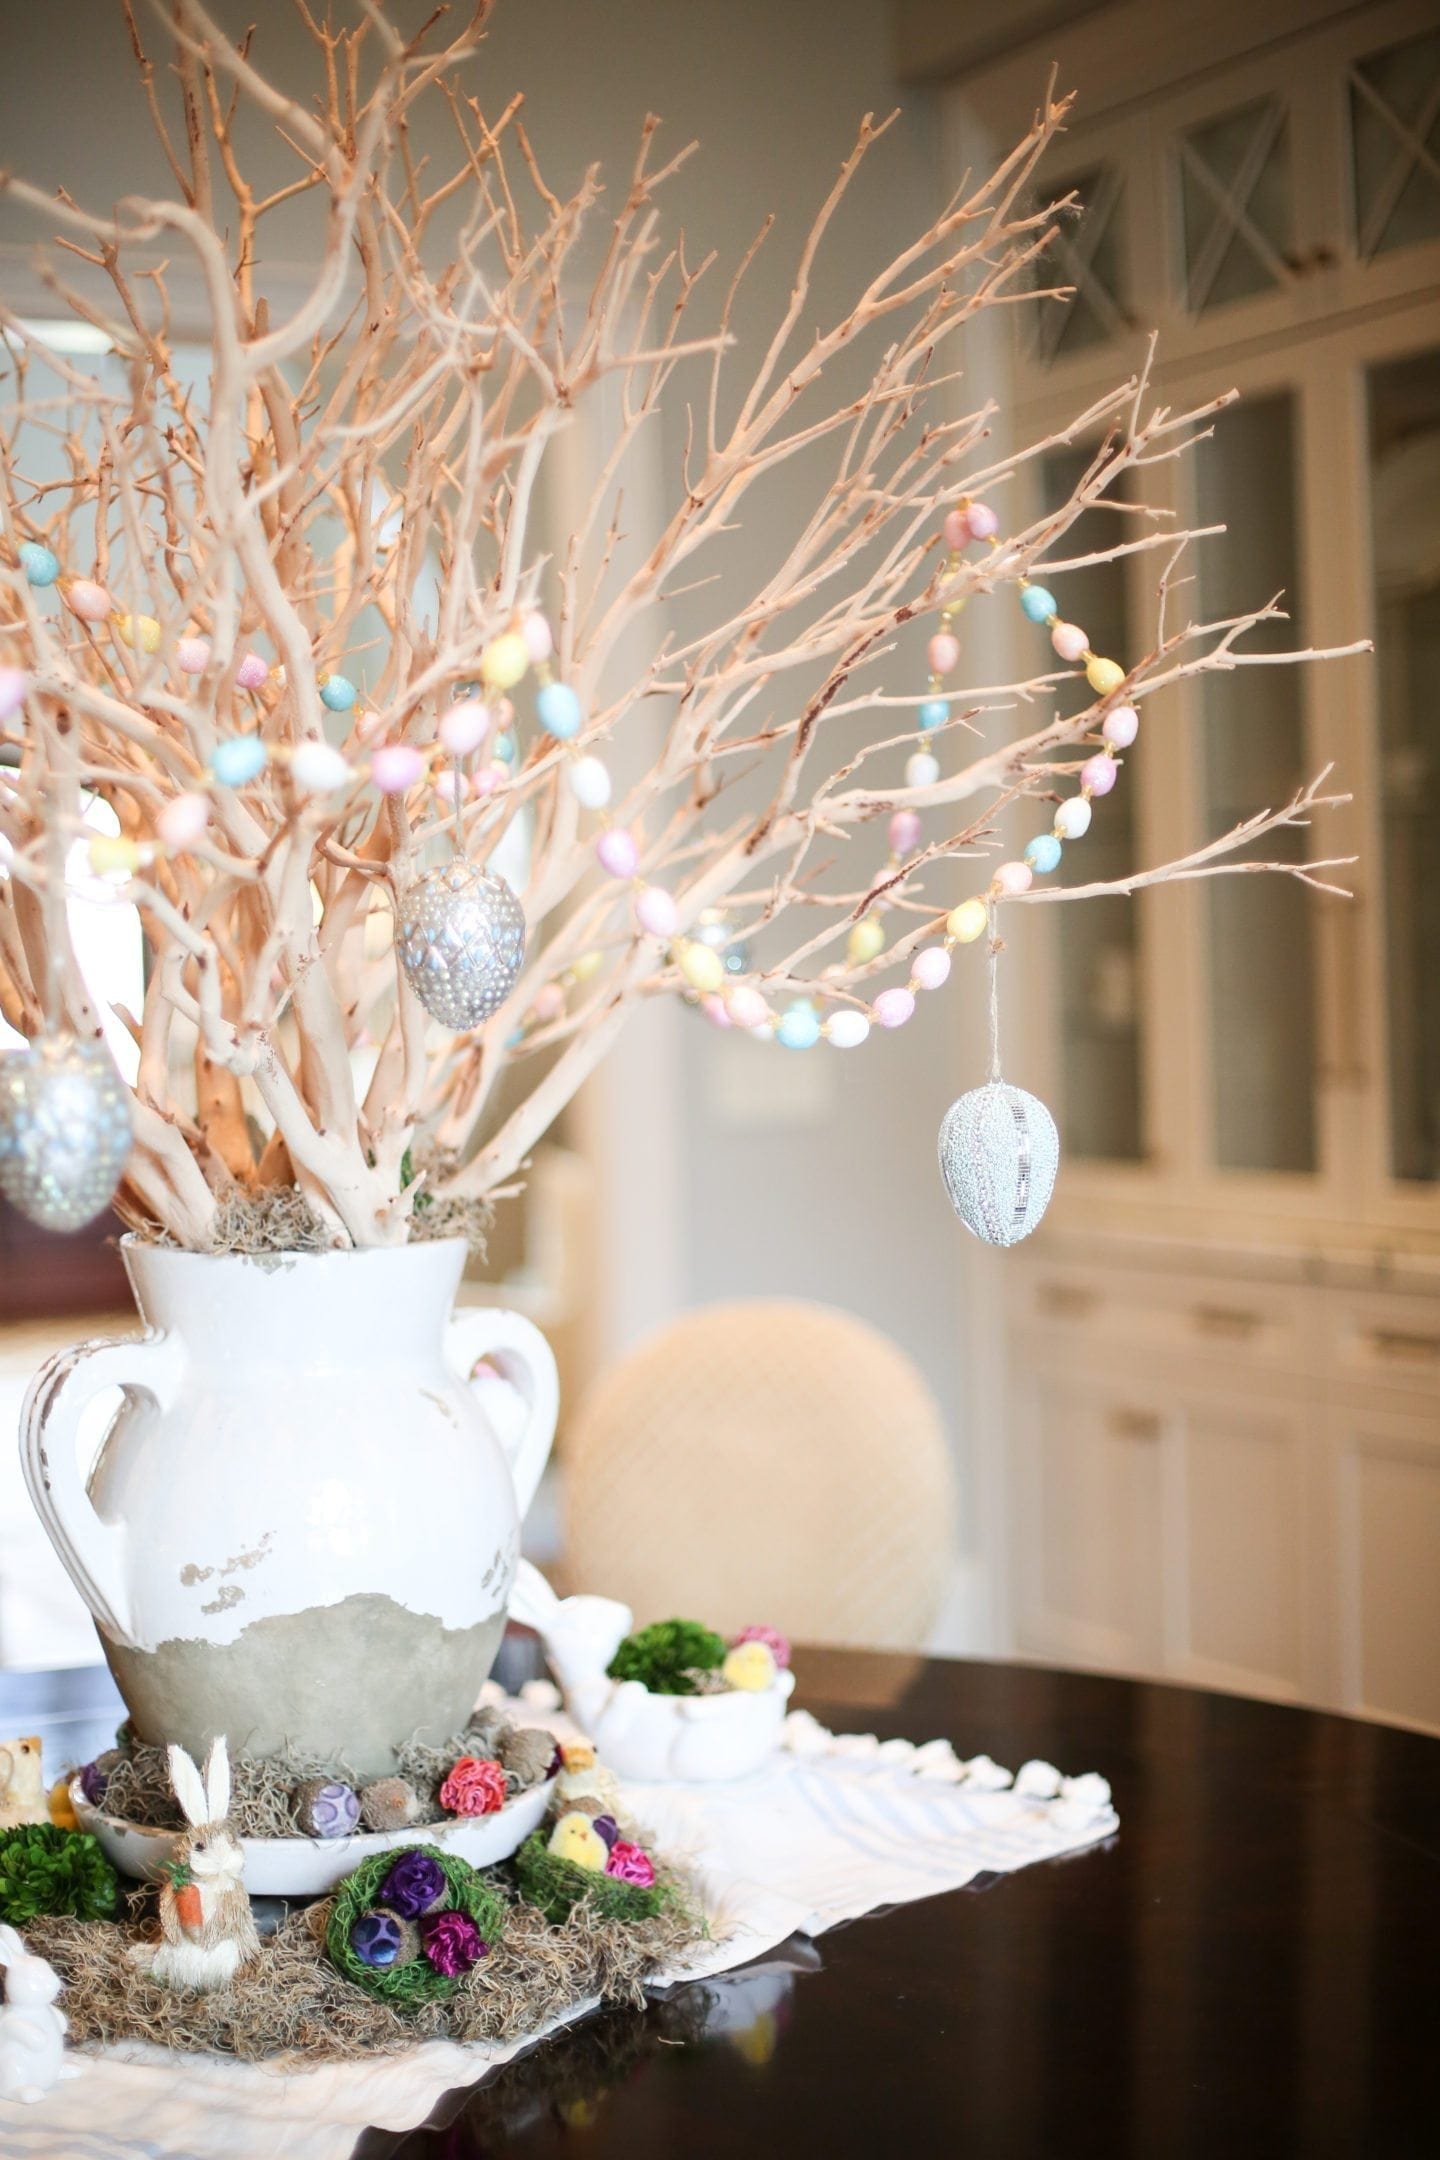 Egg garland and Pottery Barn Eggs on manzanita branch centerpiece with tuscan urn.